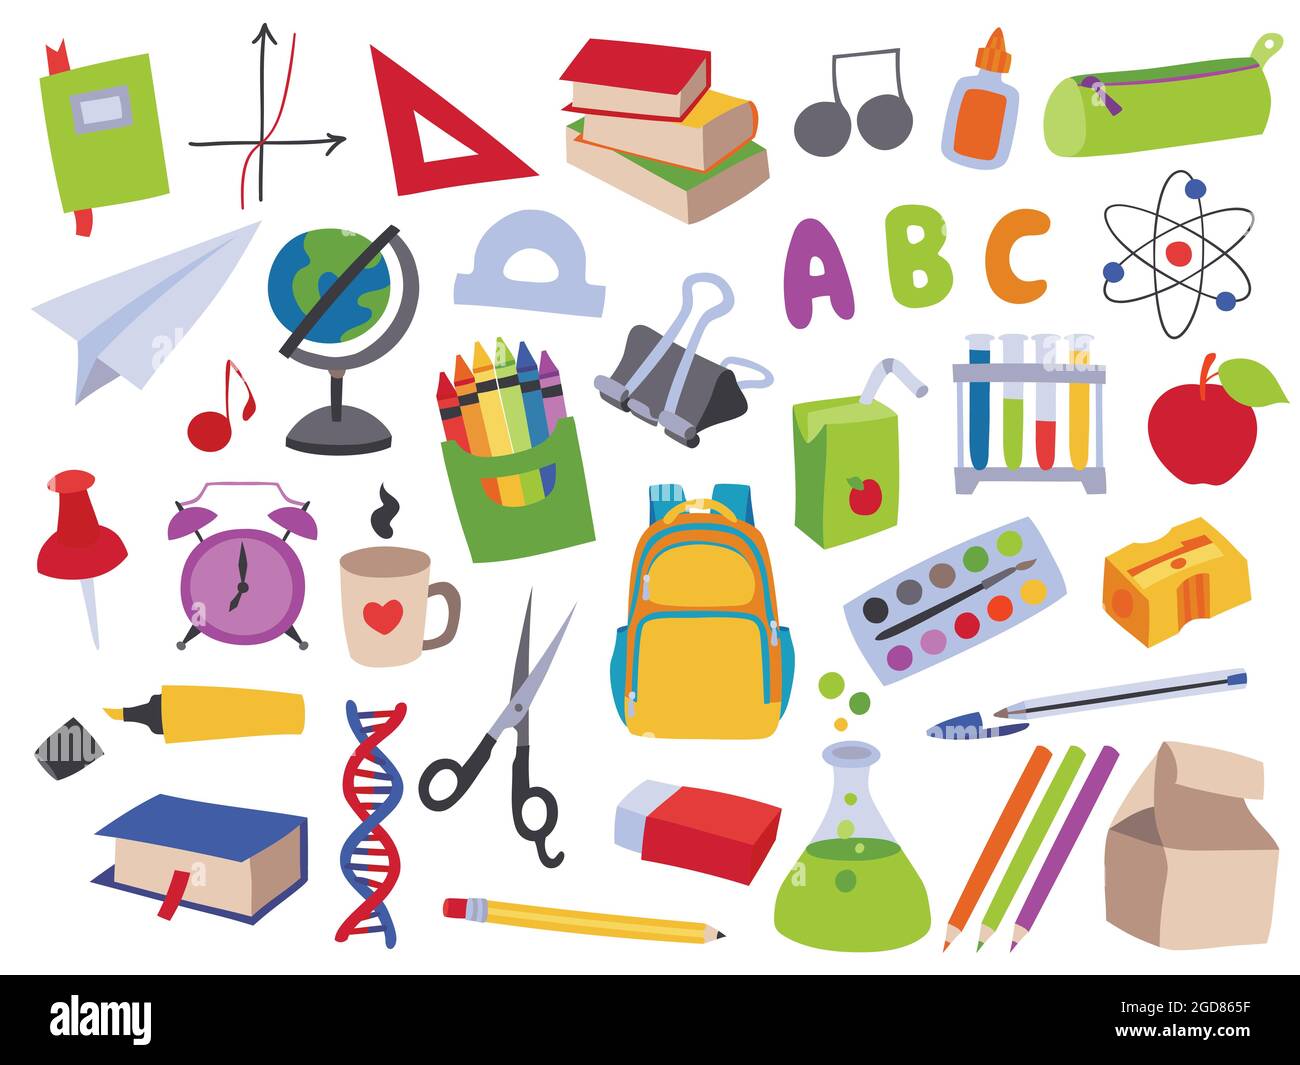 Collection of vector hand drawn illustrations of school related objects and items, back to school, first day of school. Flat colored isolated objects. Stock Vector